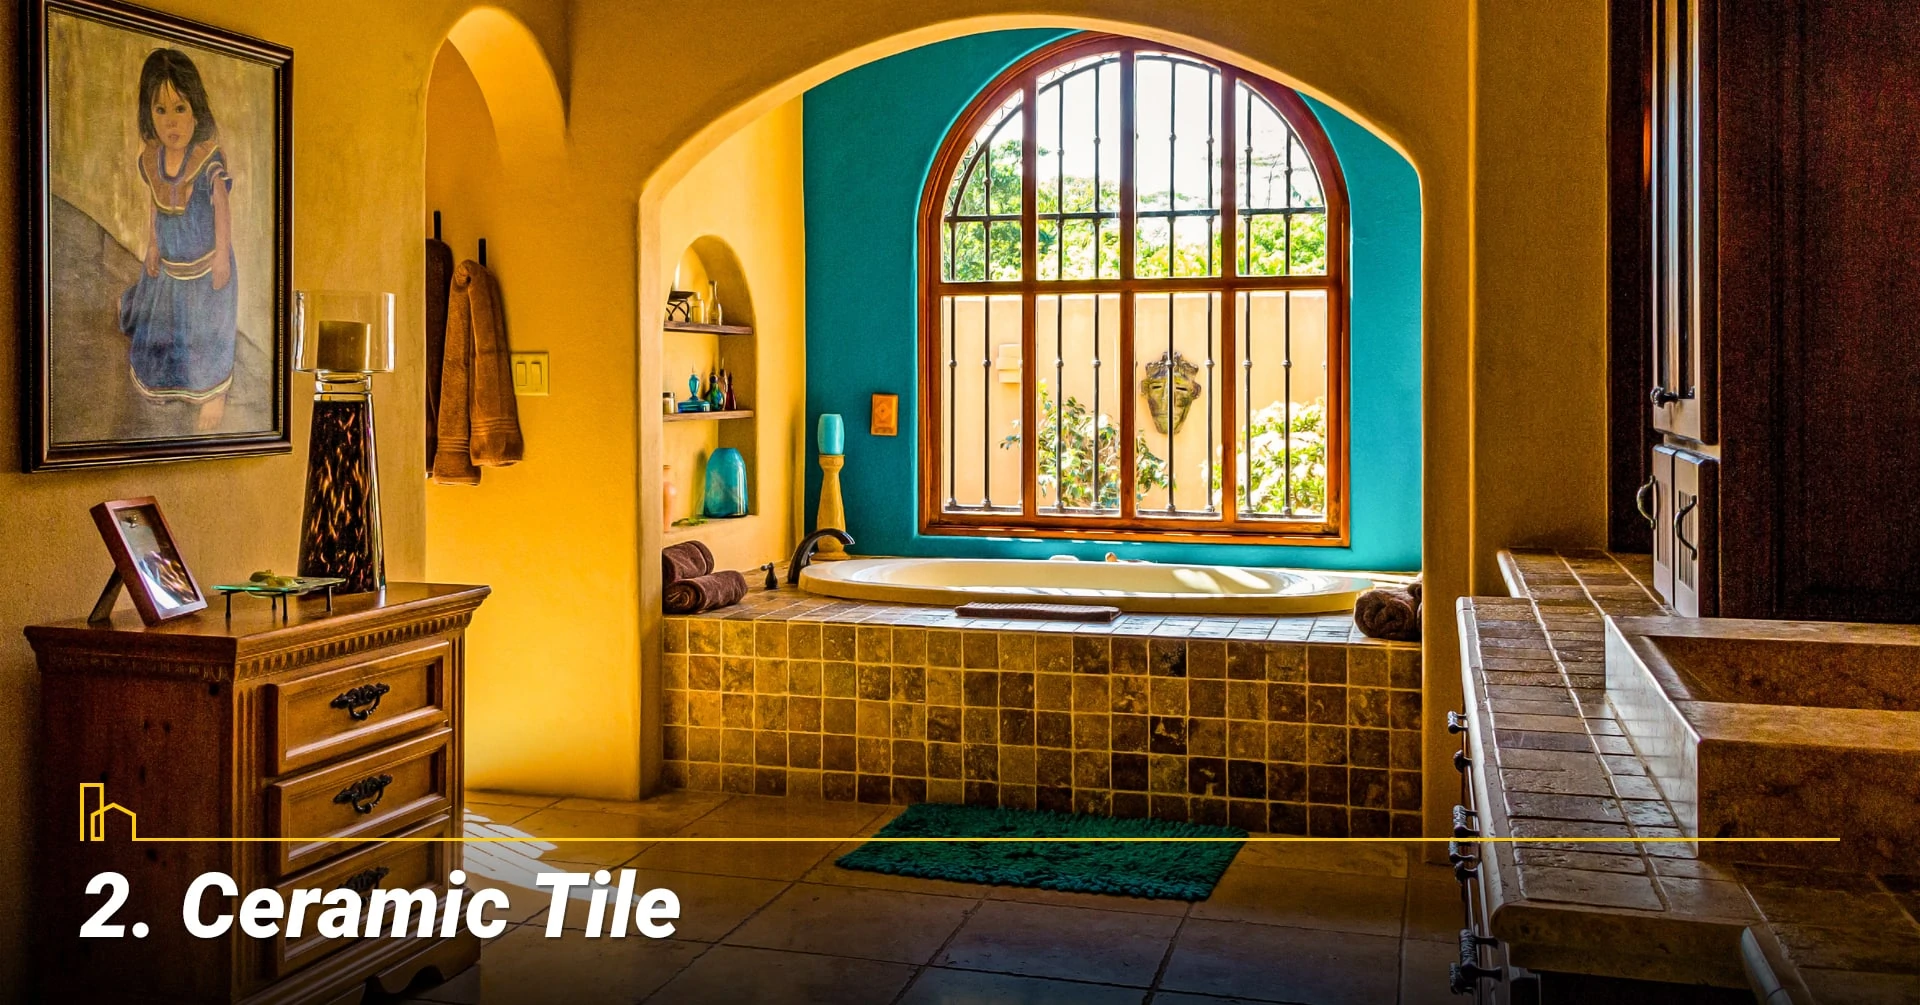 Ceramic Tile, cover your floor with ceramic tile